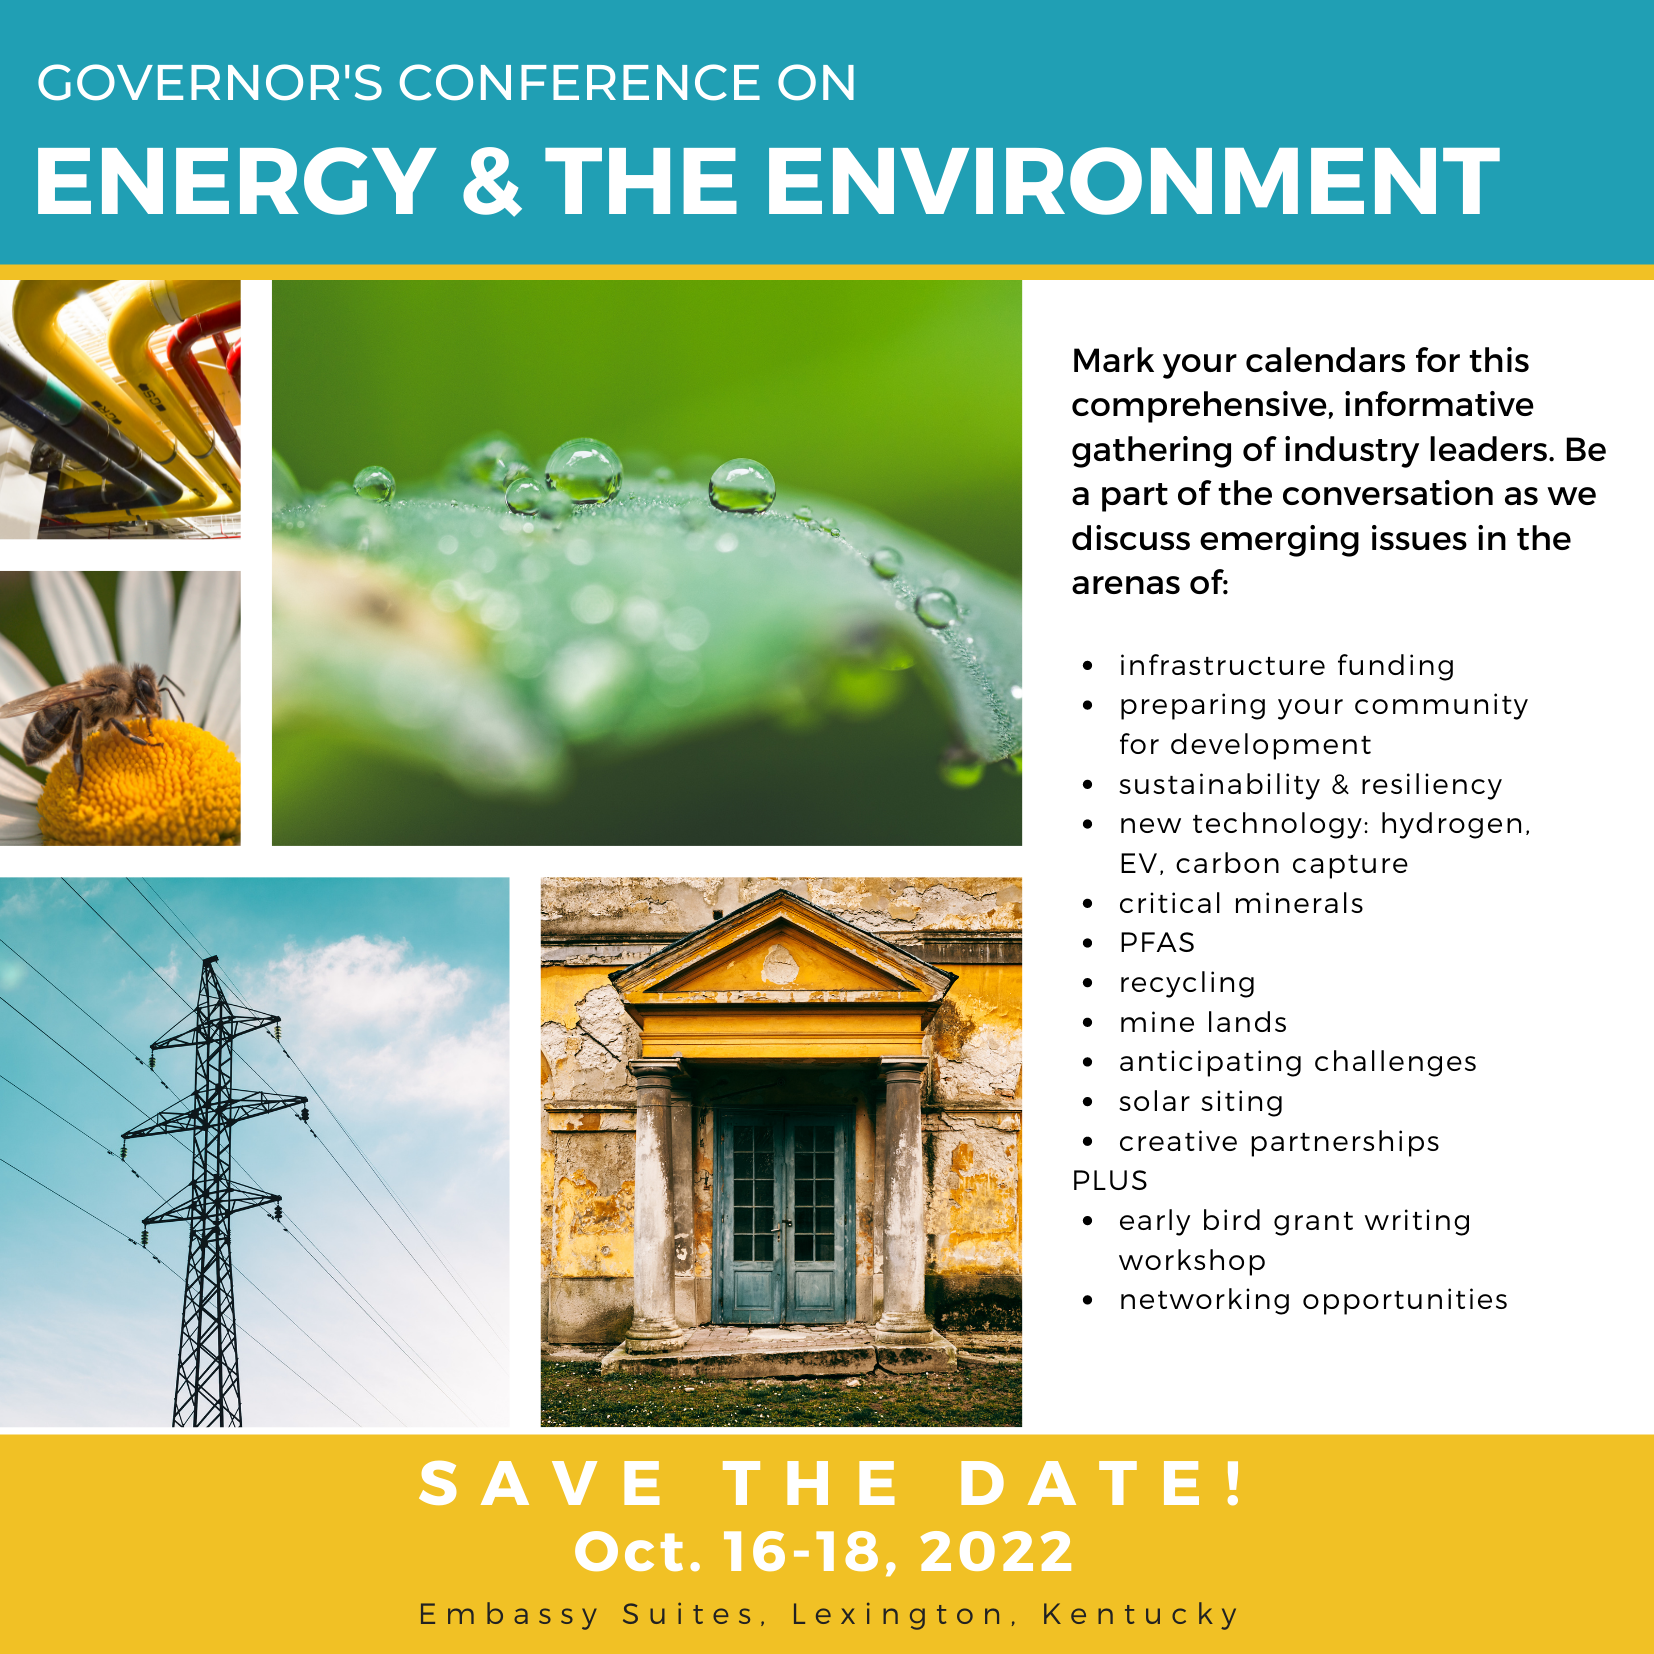 The Governor's Conference on Energy & The Environment  Oct. 16-18, 2022